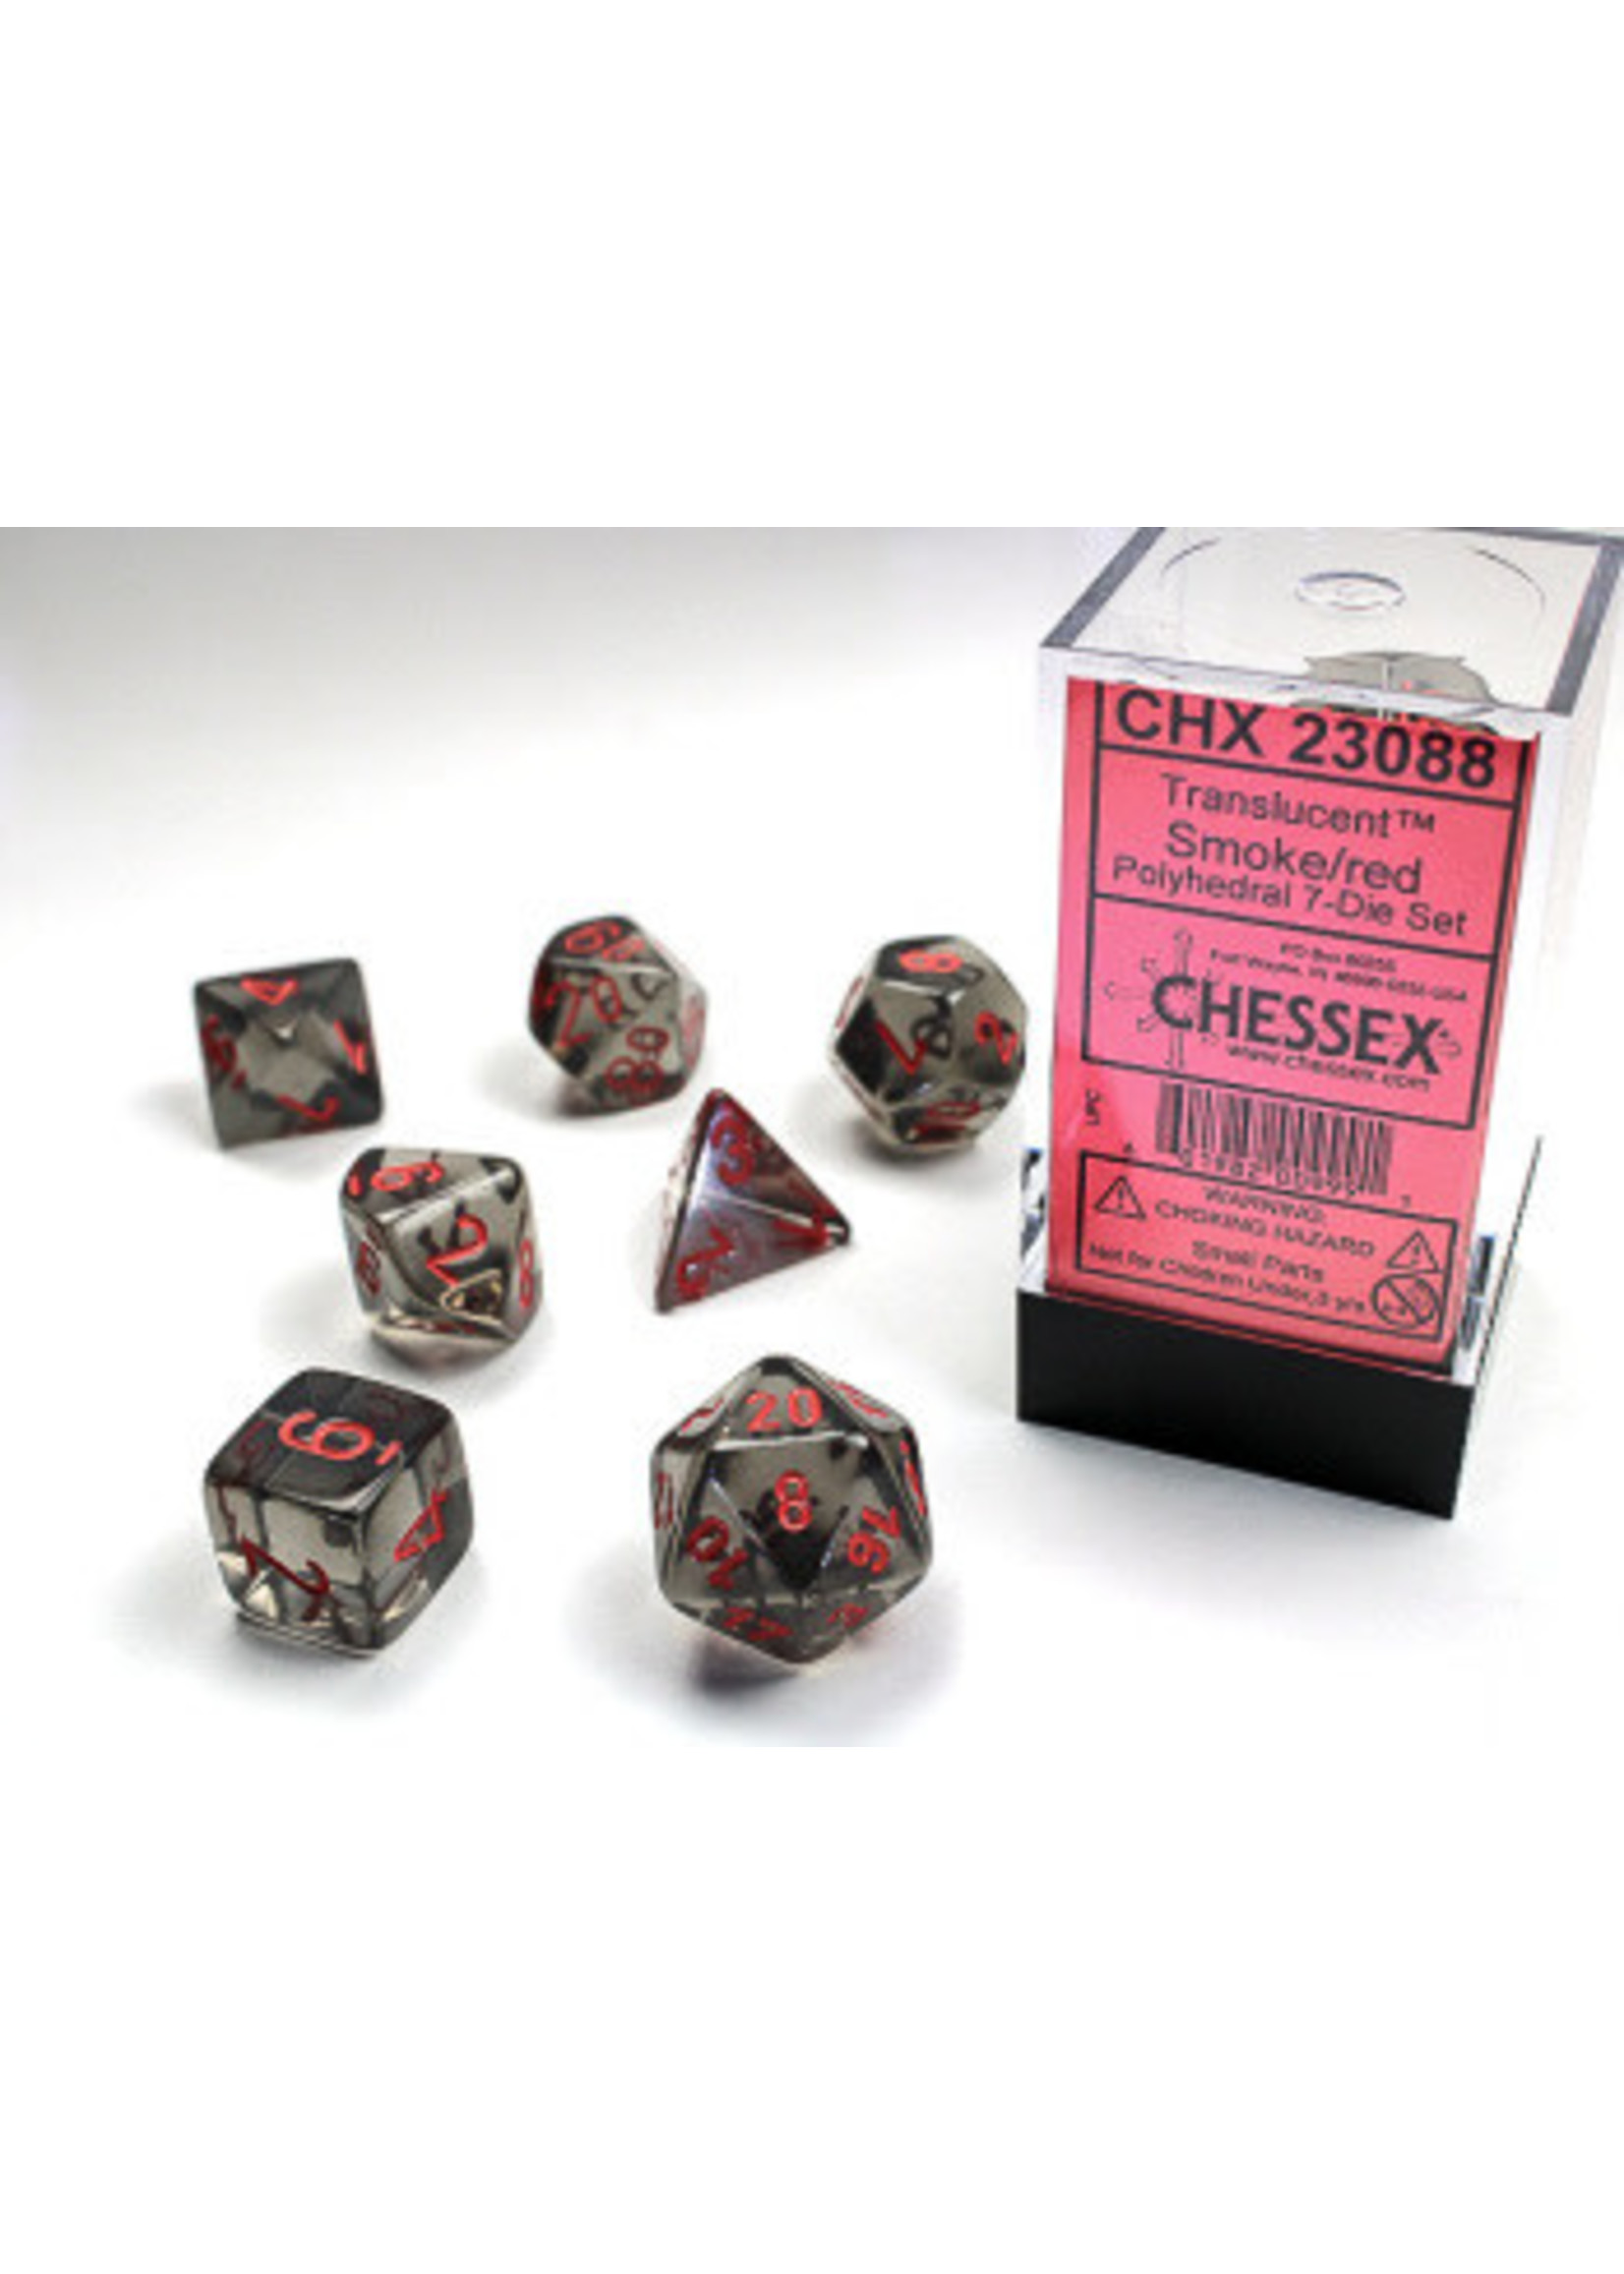 Chessex Translucent: Smoke/Red - Set of 7 Polyhedral Dice by Chessex